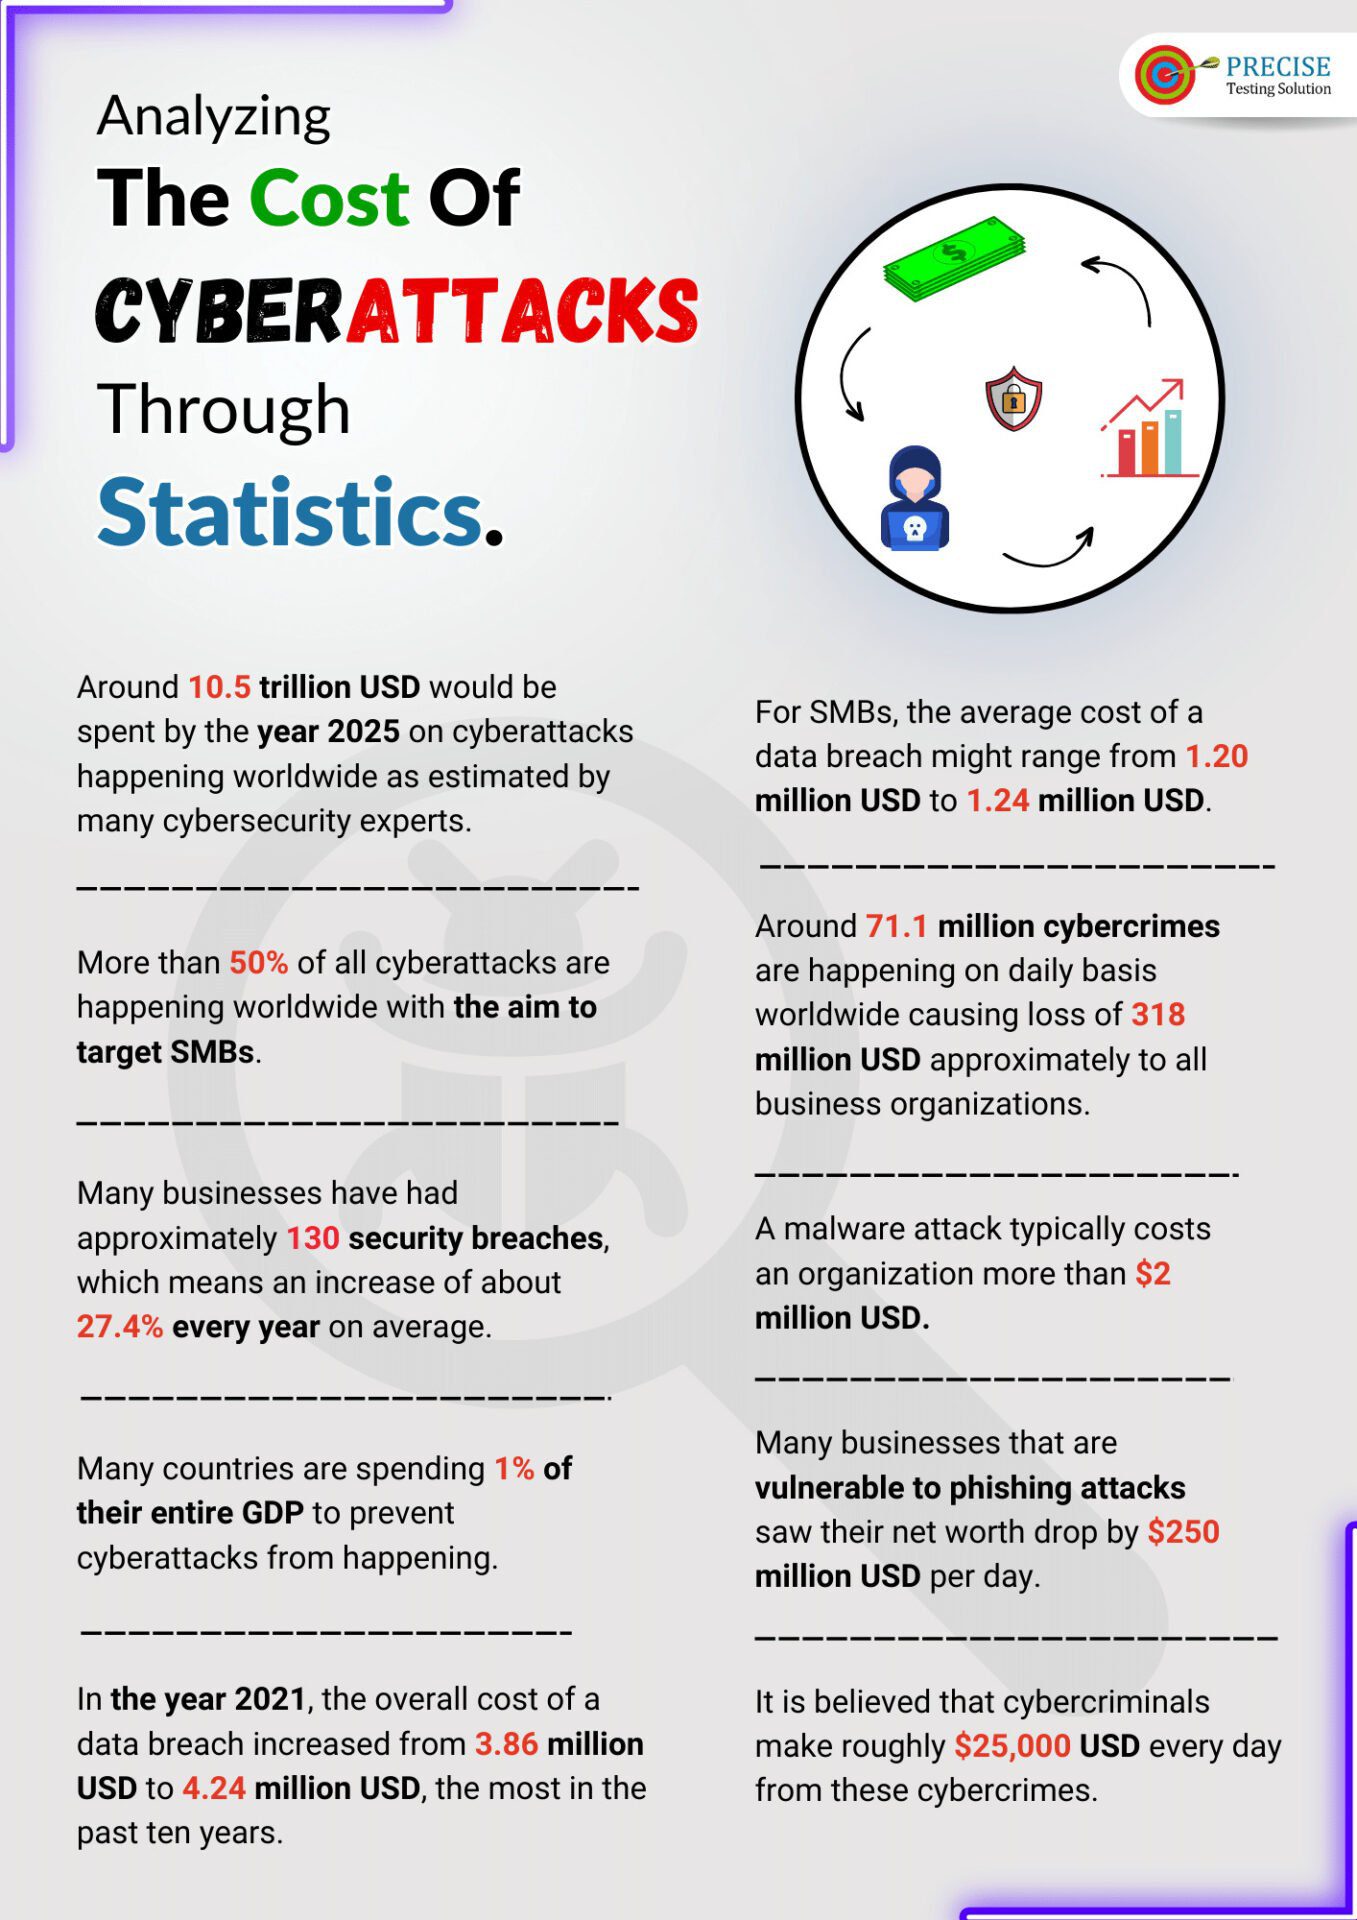 Analyzing The Cost Of Cyberattacks Through Statistics